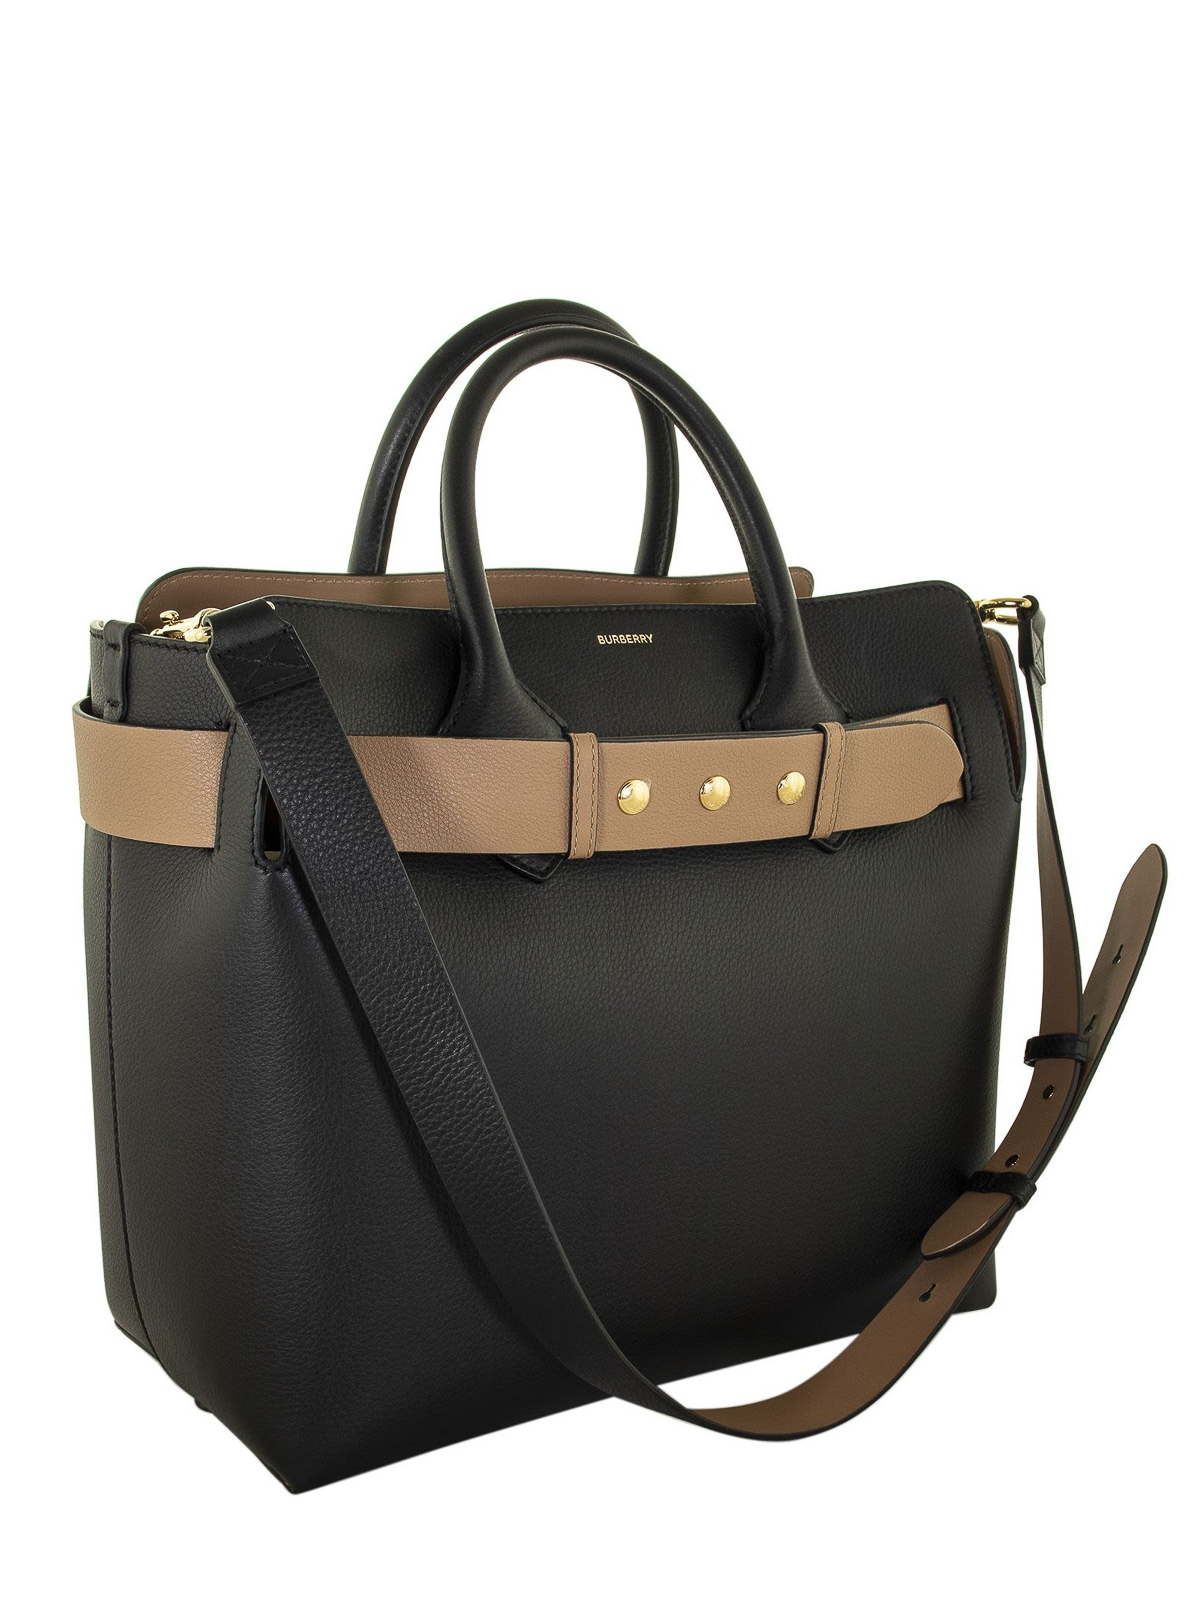 Totes bags Burberry - The black leather tote - 8009561